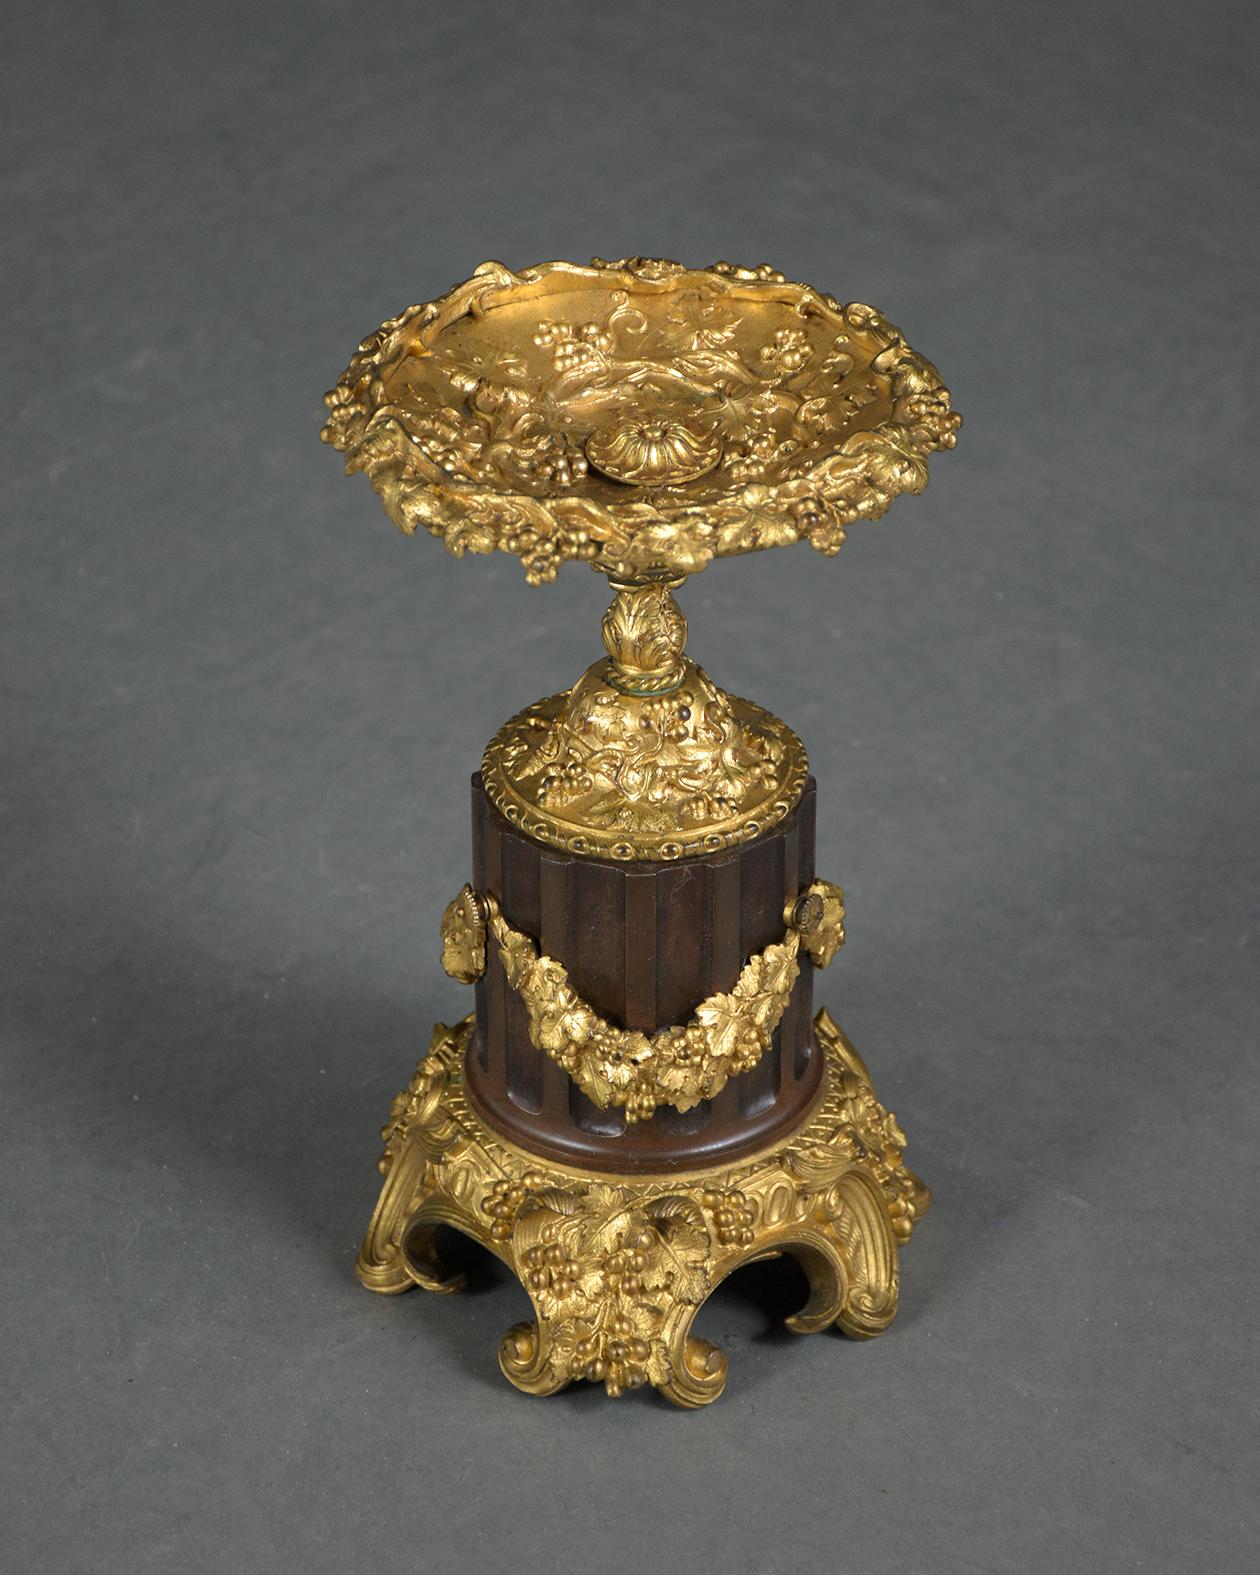 Early 19th-Century French Bronzed Urns with Gold-Plated Garland Decoration In Good Condition For Sale In Los Angeles, CA